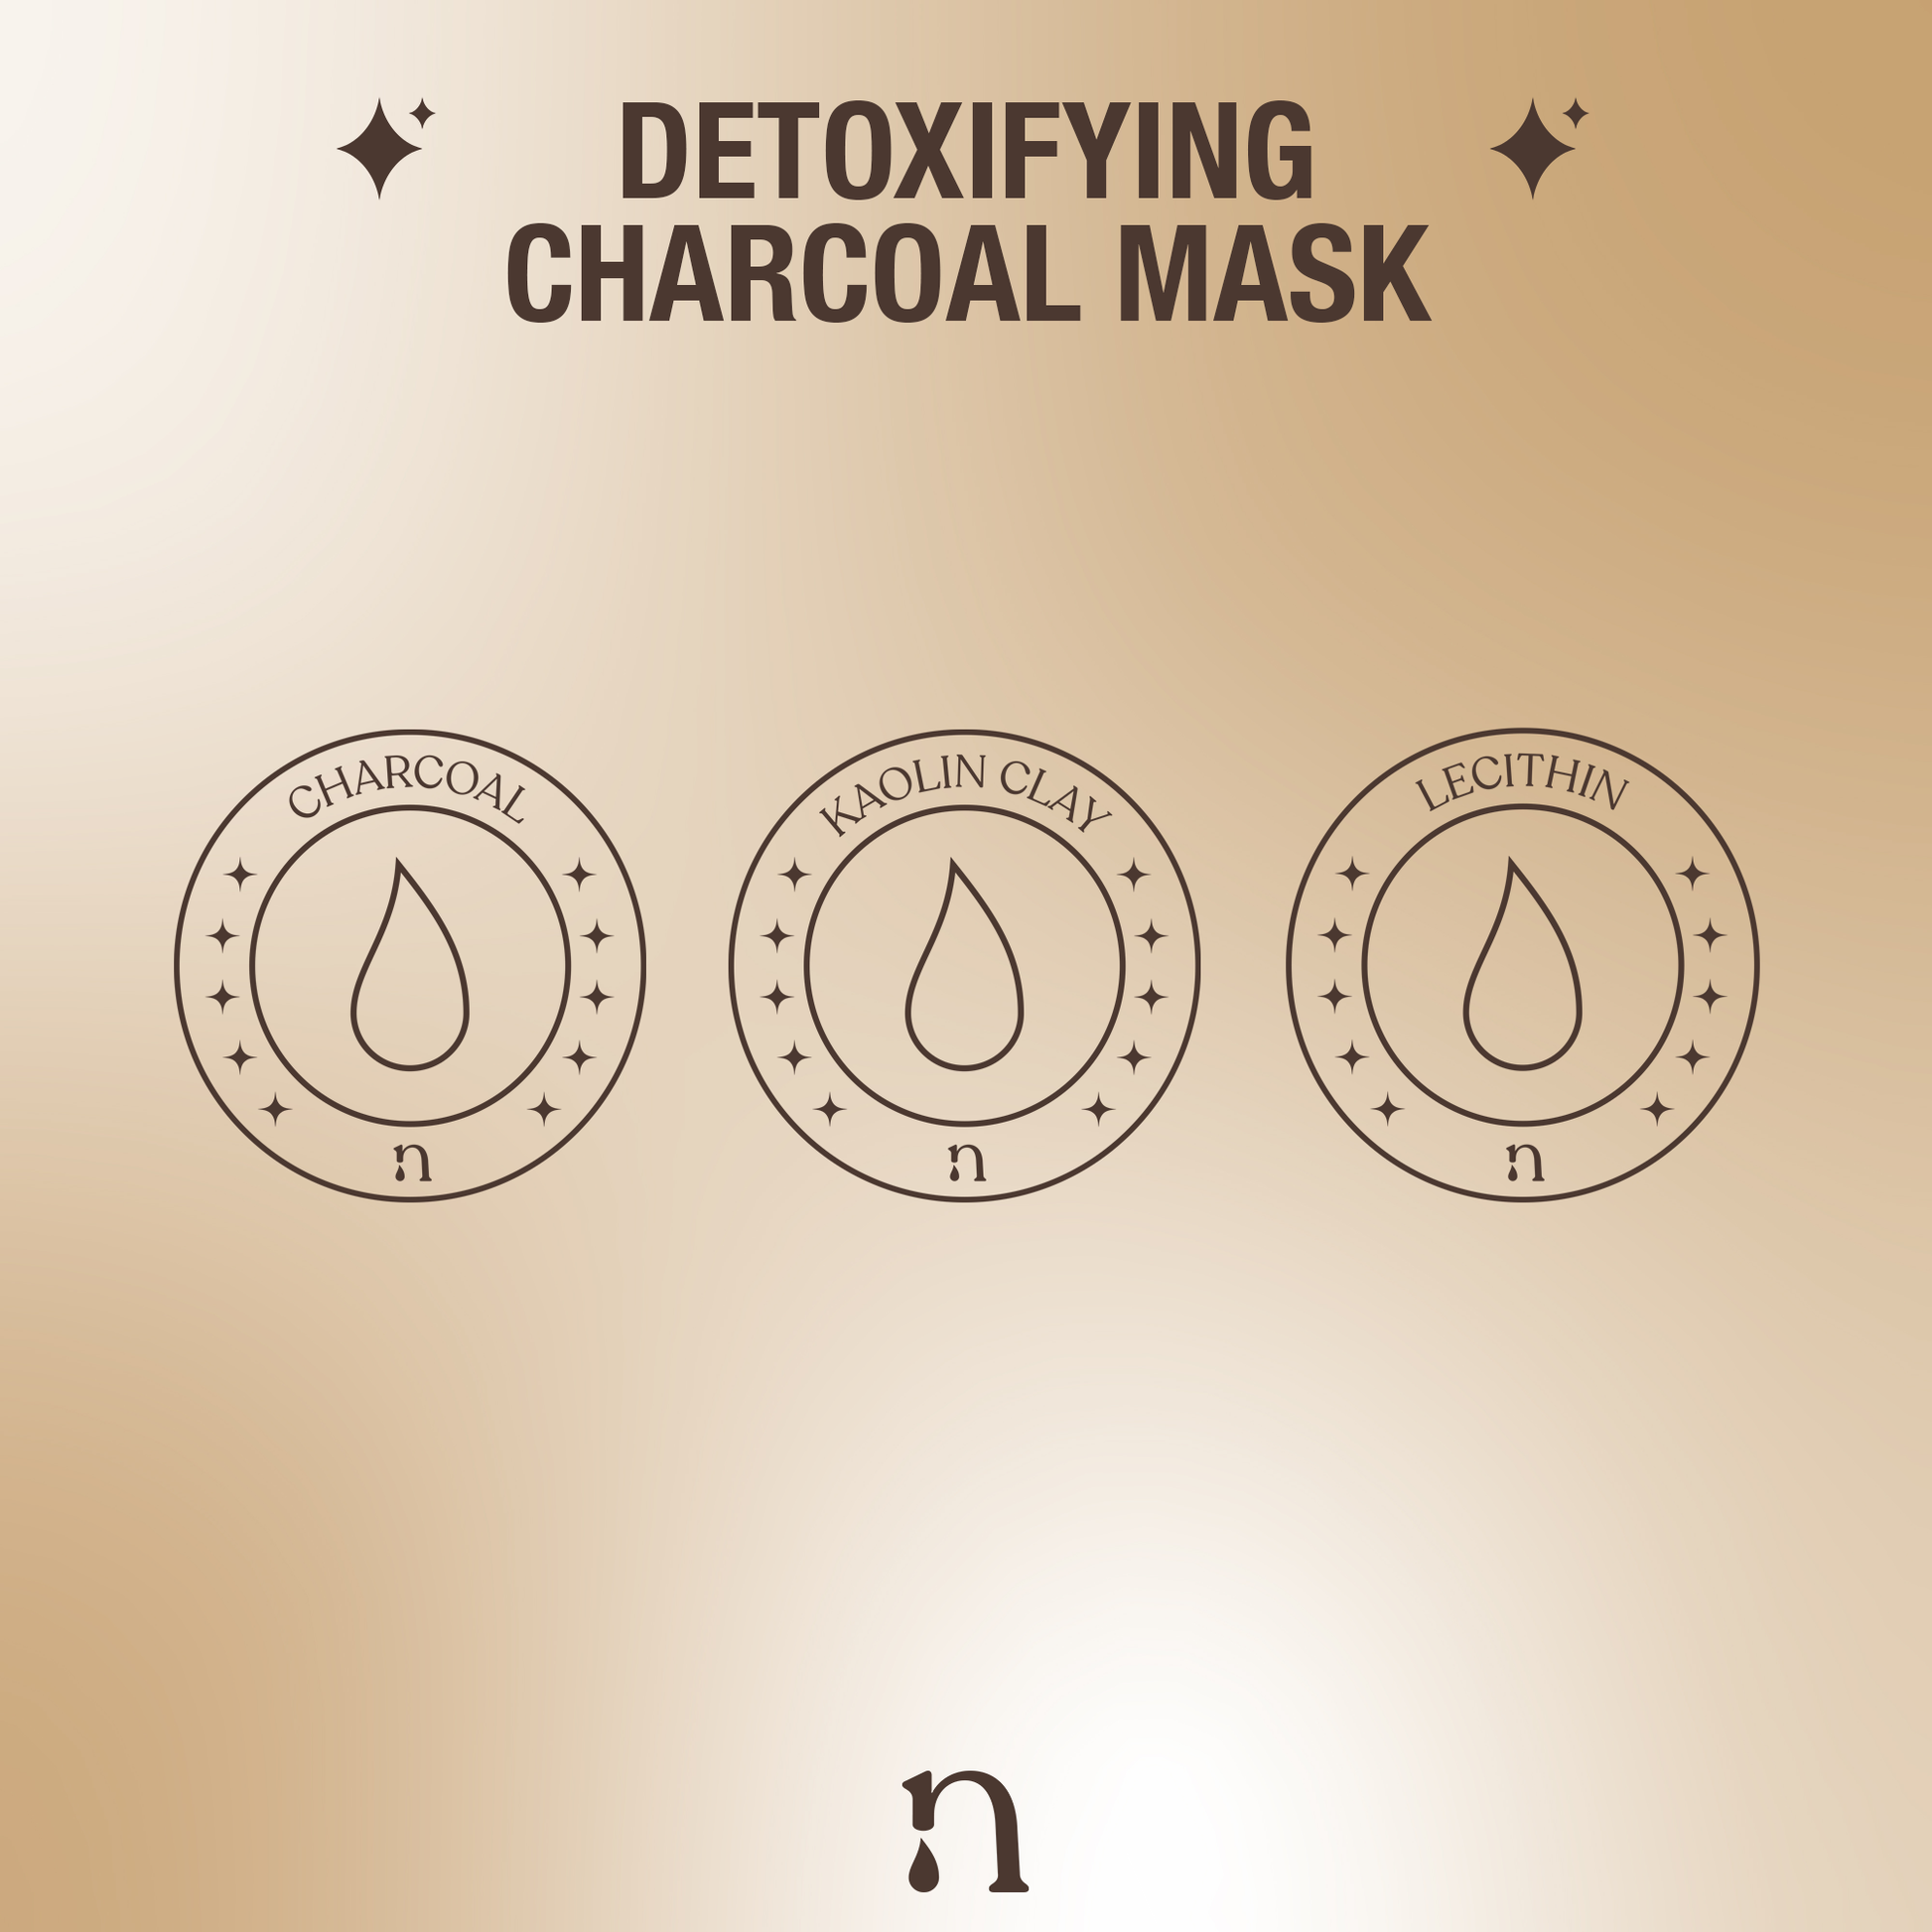 Graphic representation of key ingredients for a detoxifying charcoal mask, depicted with icons on a neutral background. The icons visually communicate the powerful components that contribute to the mask's efficacy for a revitalizing and clarifying skincar